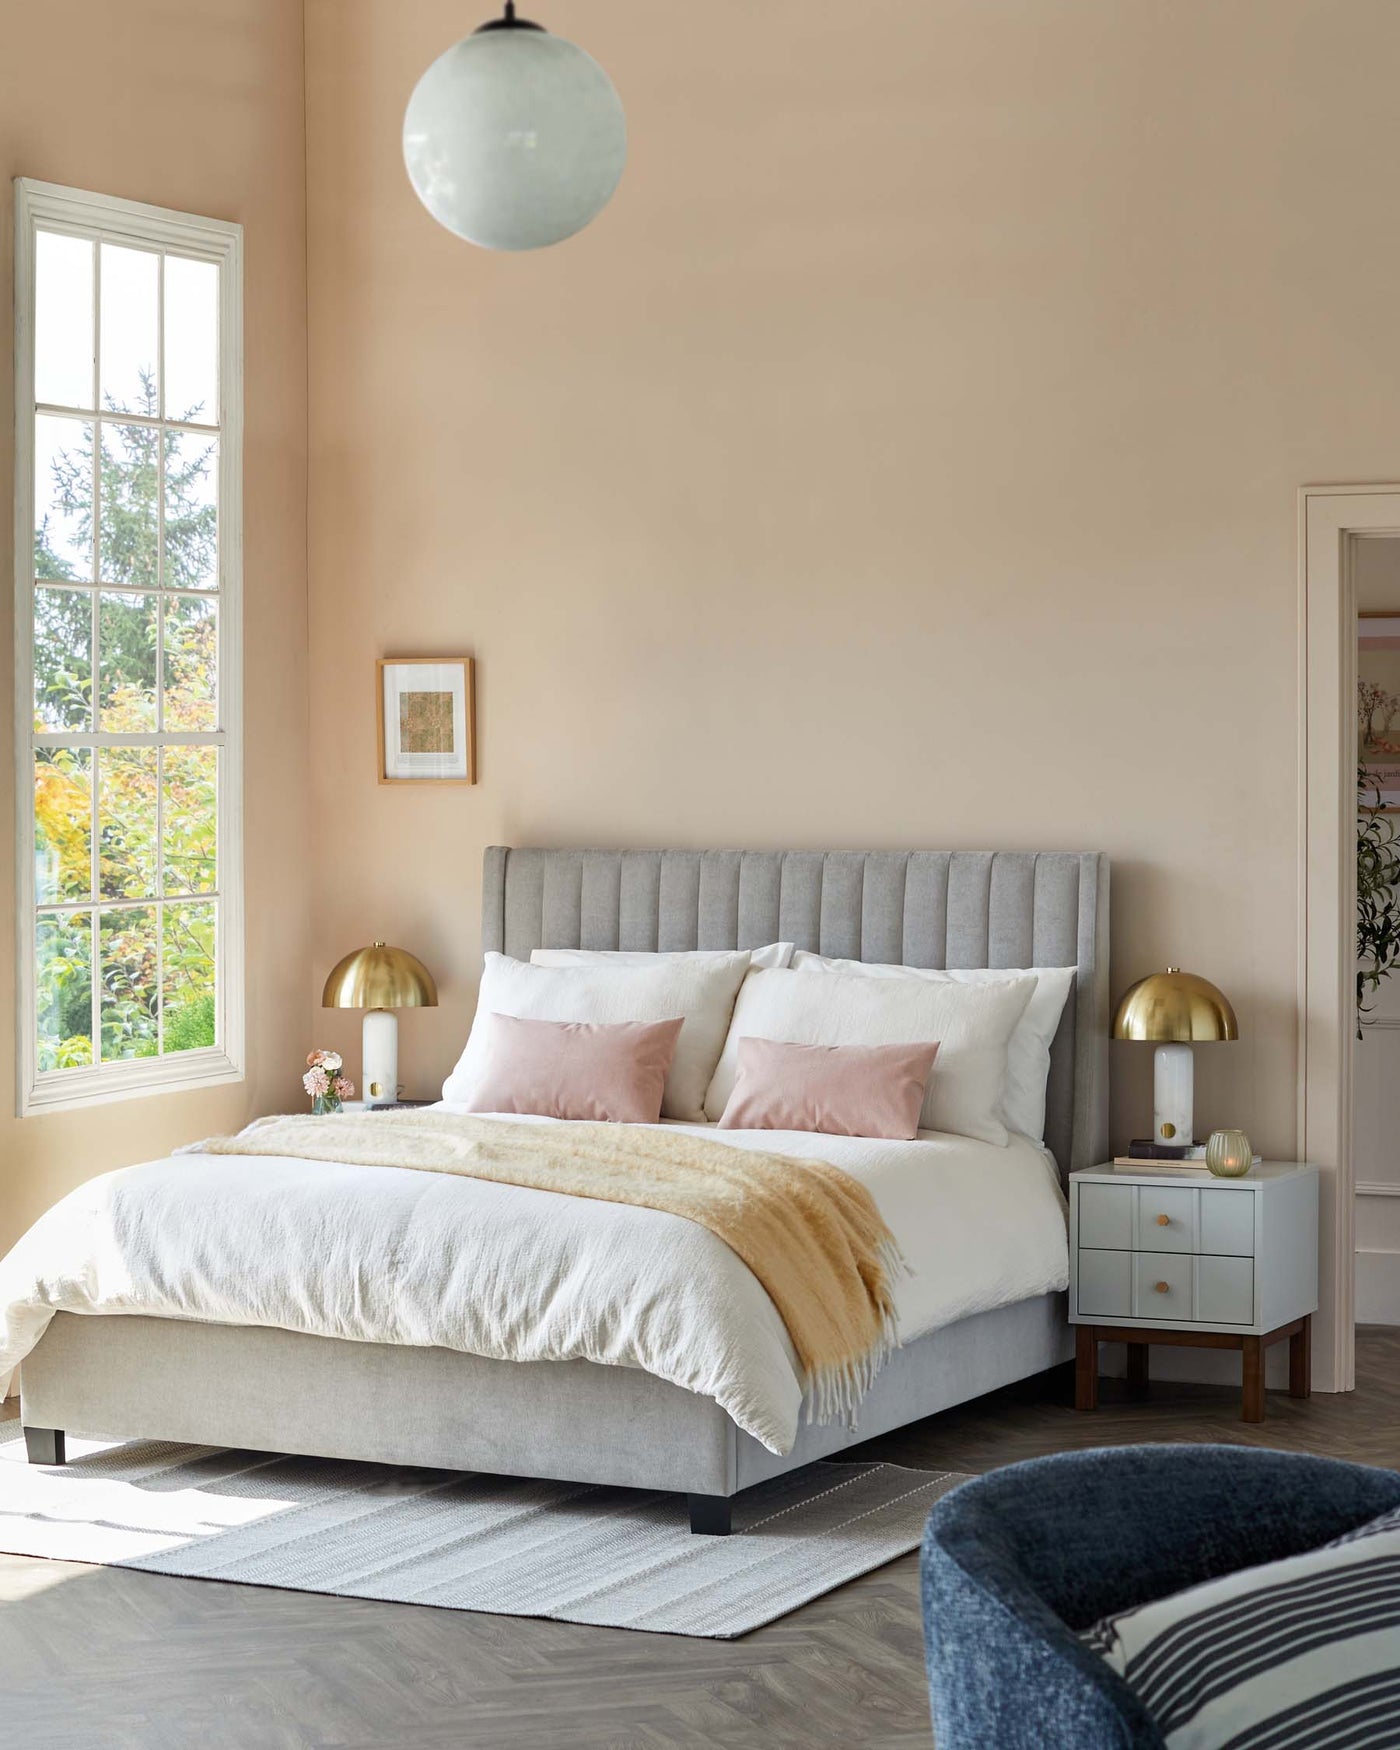 Elegant bedroom setting featuring a contemporary upholstered king-size bed with a tufted grey headboard, dressed in white bedding with soft pink accent pillows and a cosy beige throw blanket. To the right stands a modern white bedside table with a wood base, adorned with a gold-toned lamp and decorative items. A striped grey area rug lies partially under the bed, and a partially visible navy blue armchair with white stripes adds a touch of sophistication to the room.